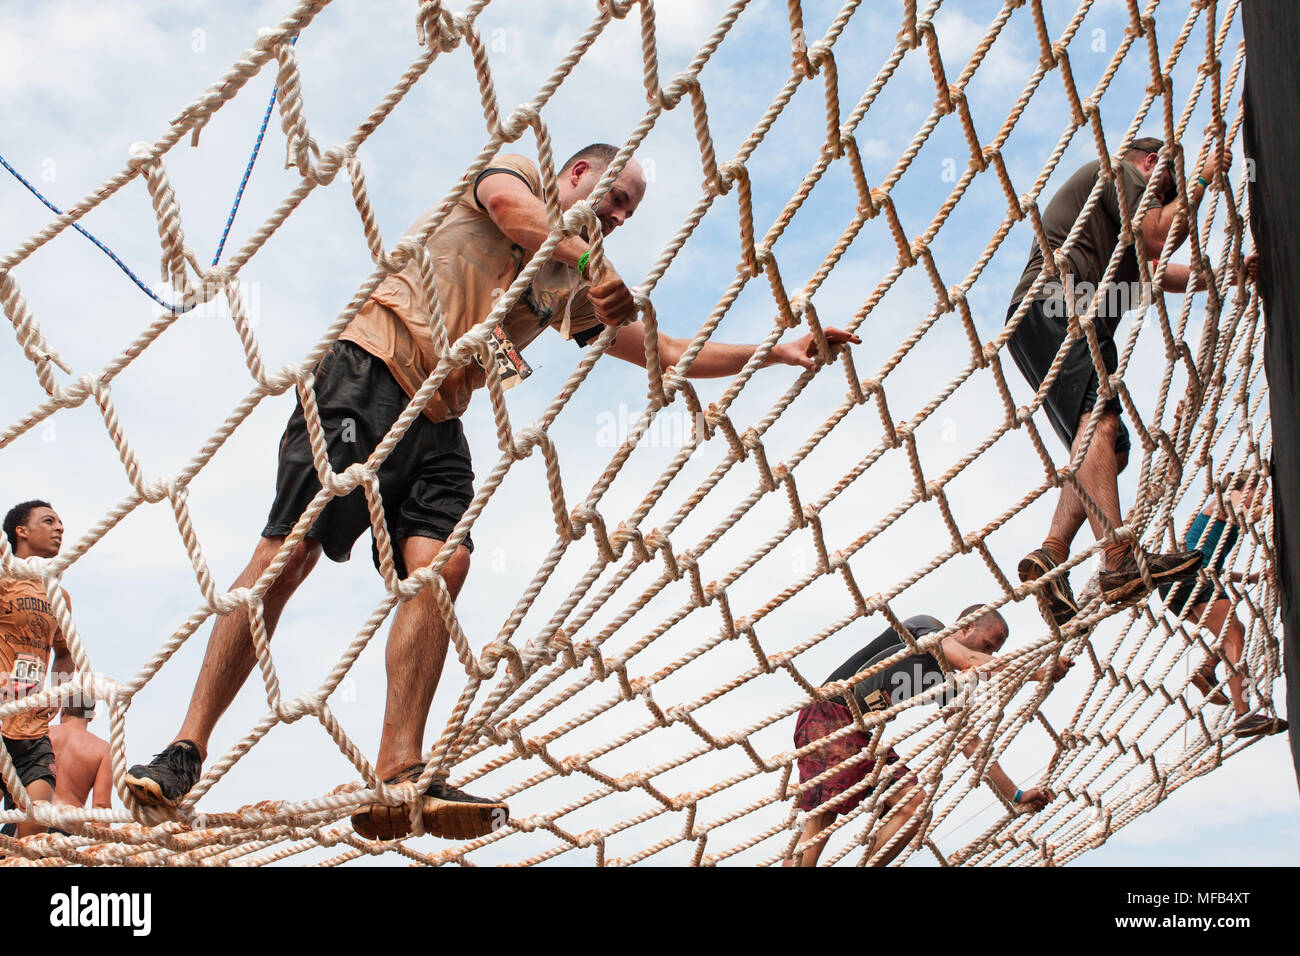 Competitors climb a cargo net on their way to the next obstacle at the Rugged Maniac Obstacle Course race on August 22, 2015 in Conyers, GA. Stock Photo